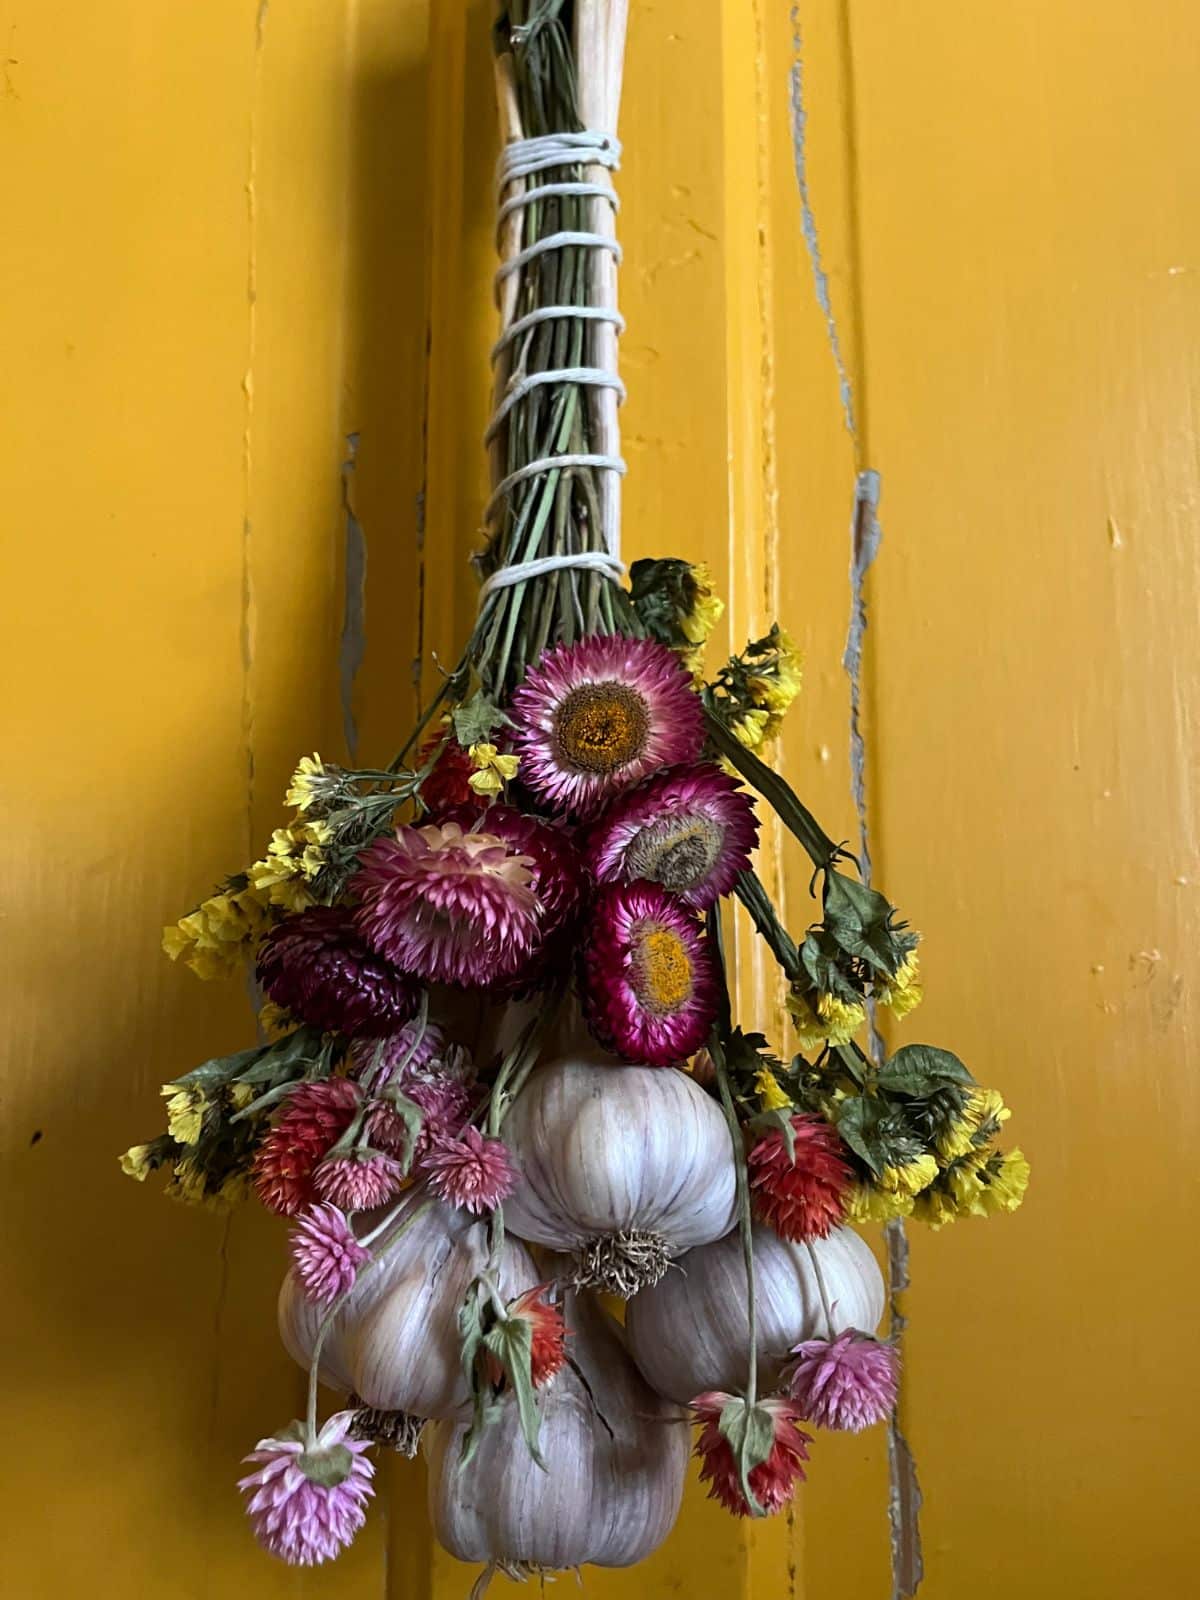 A bundle made of hardneck garlic and dry flowers hanging on a kitchen door